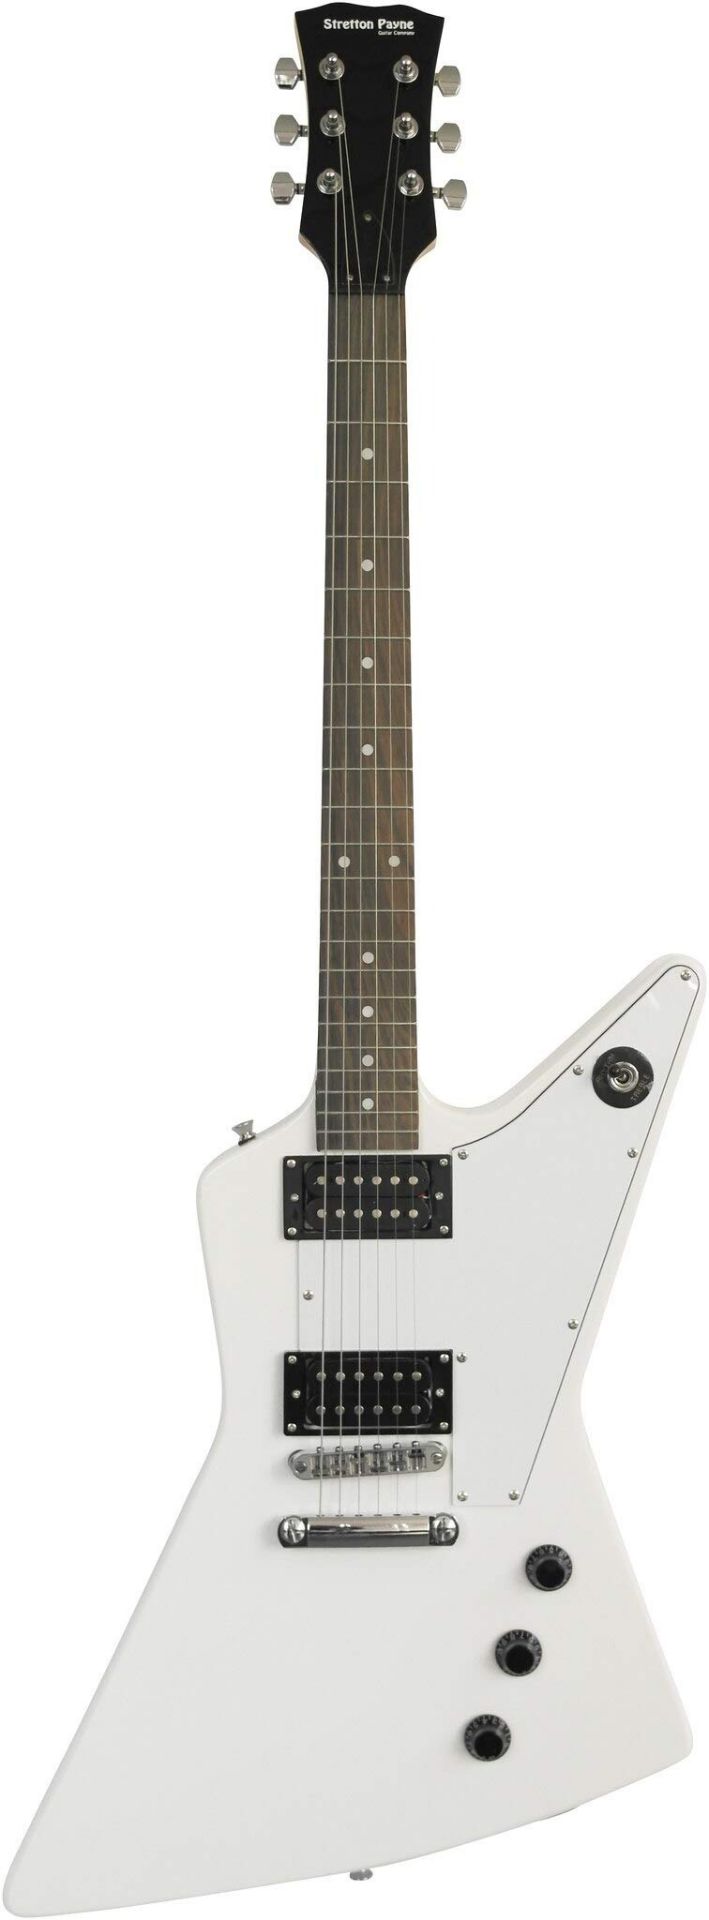 Stretton Payne XE Electric Guitar with padded bag. Guitar in White - ER21